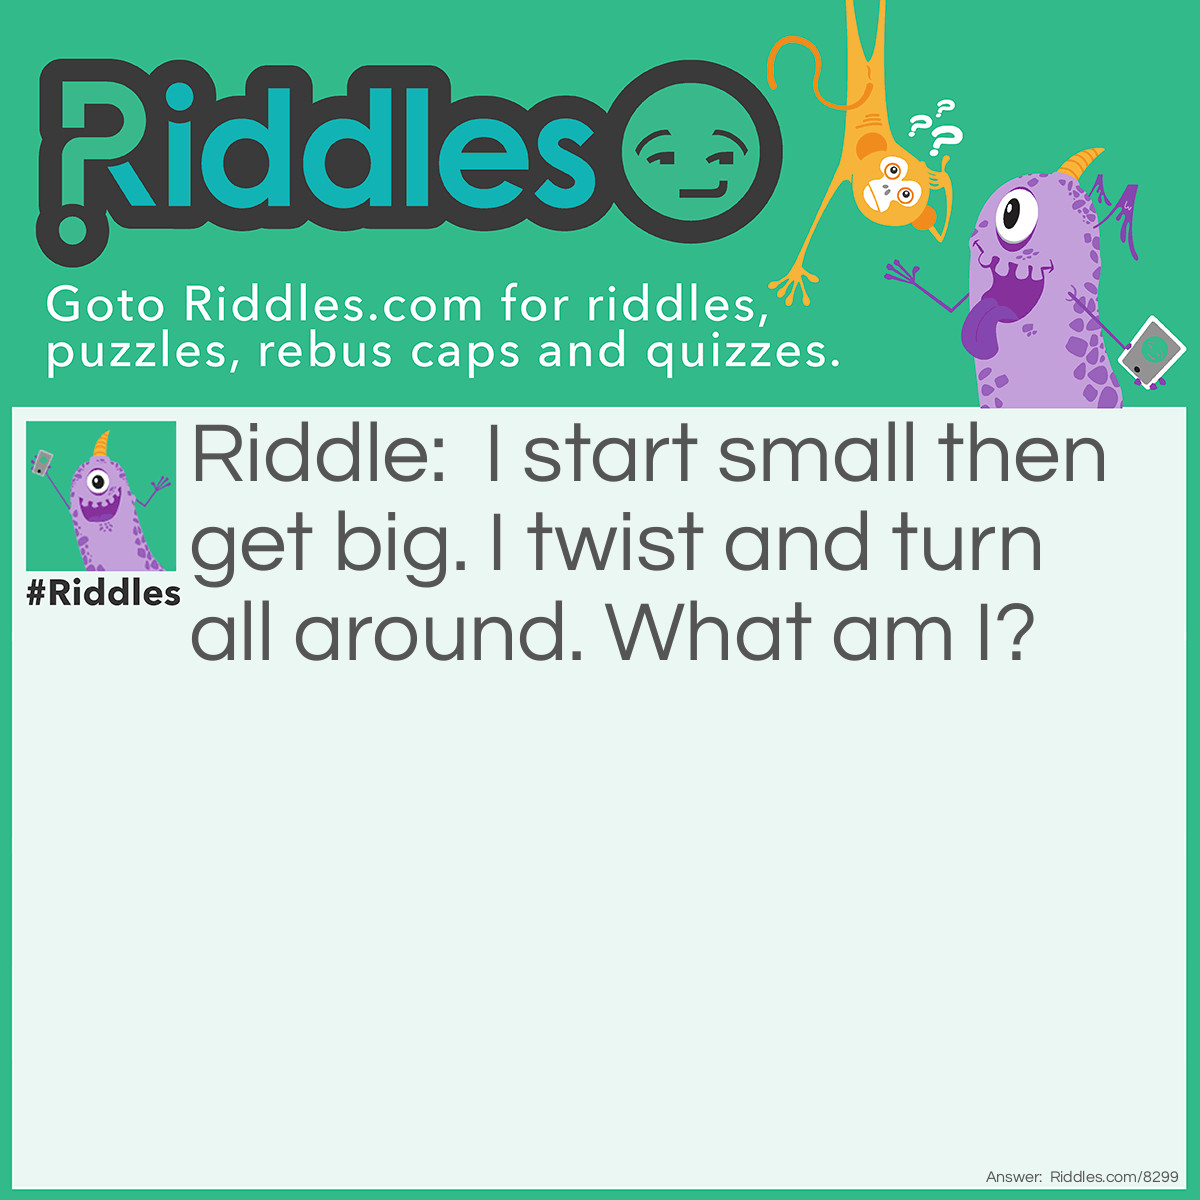 Riddle: I start small then get big. I twist and turn all around. What am I? Answer: A Tornado.